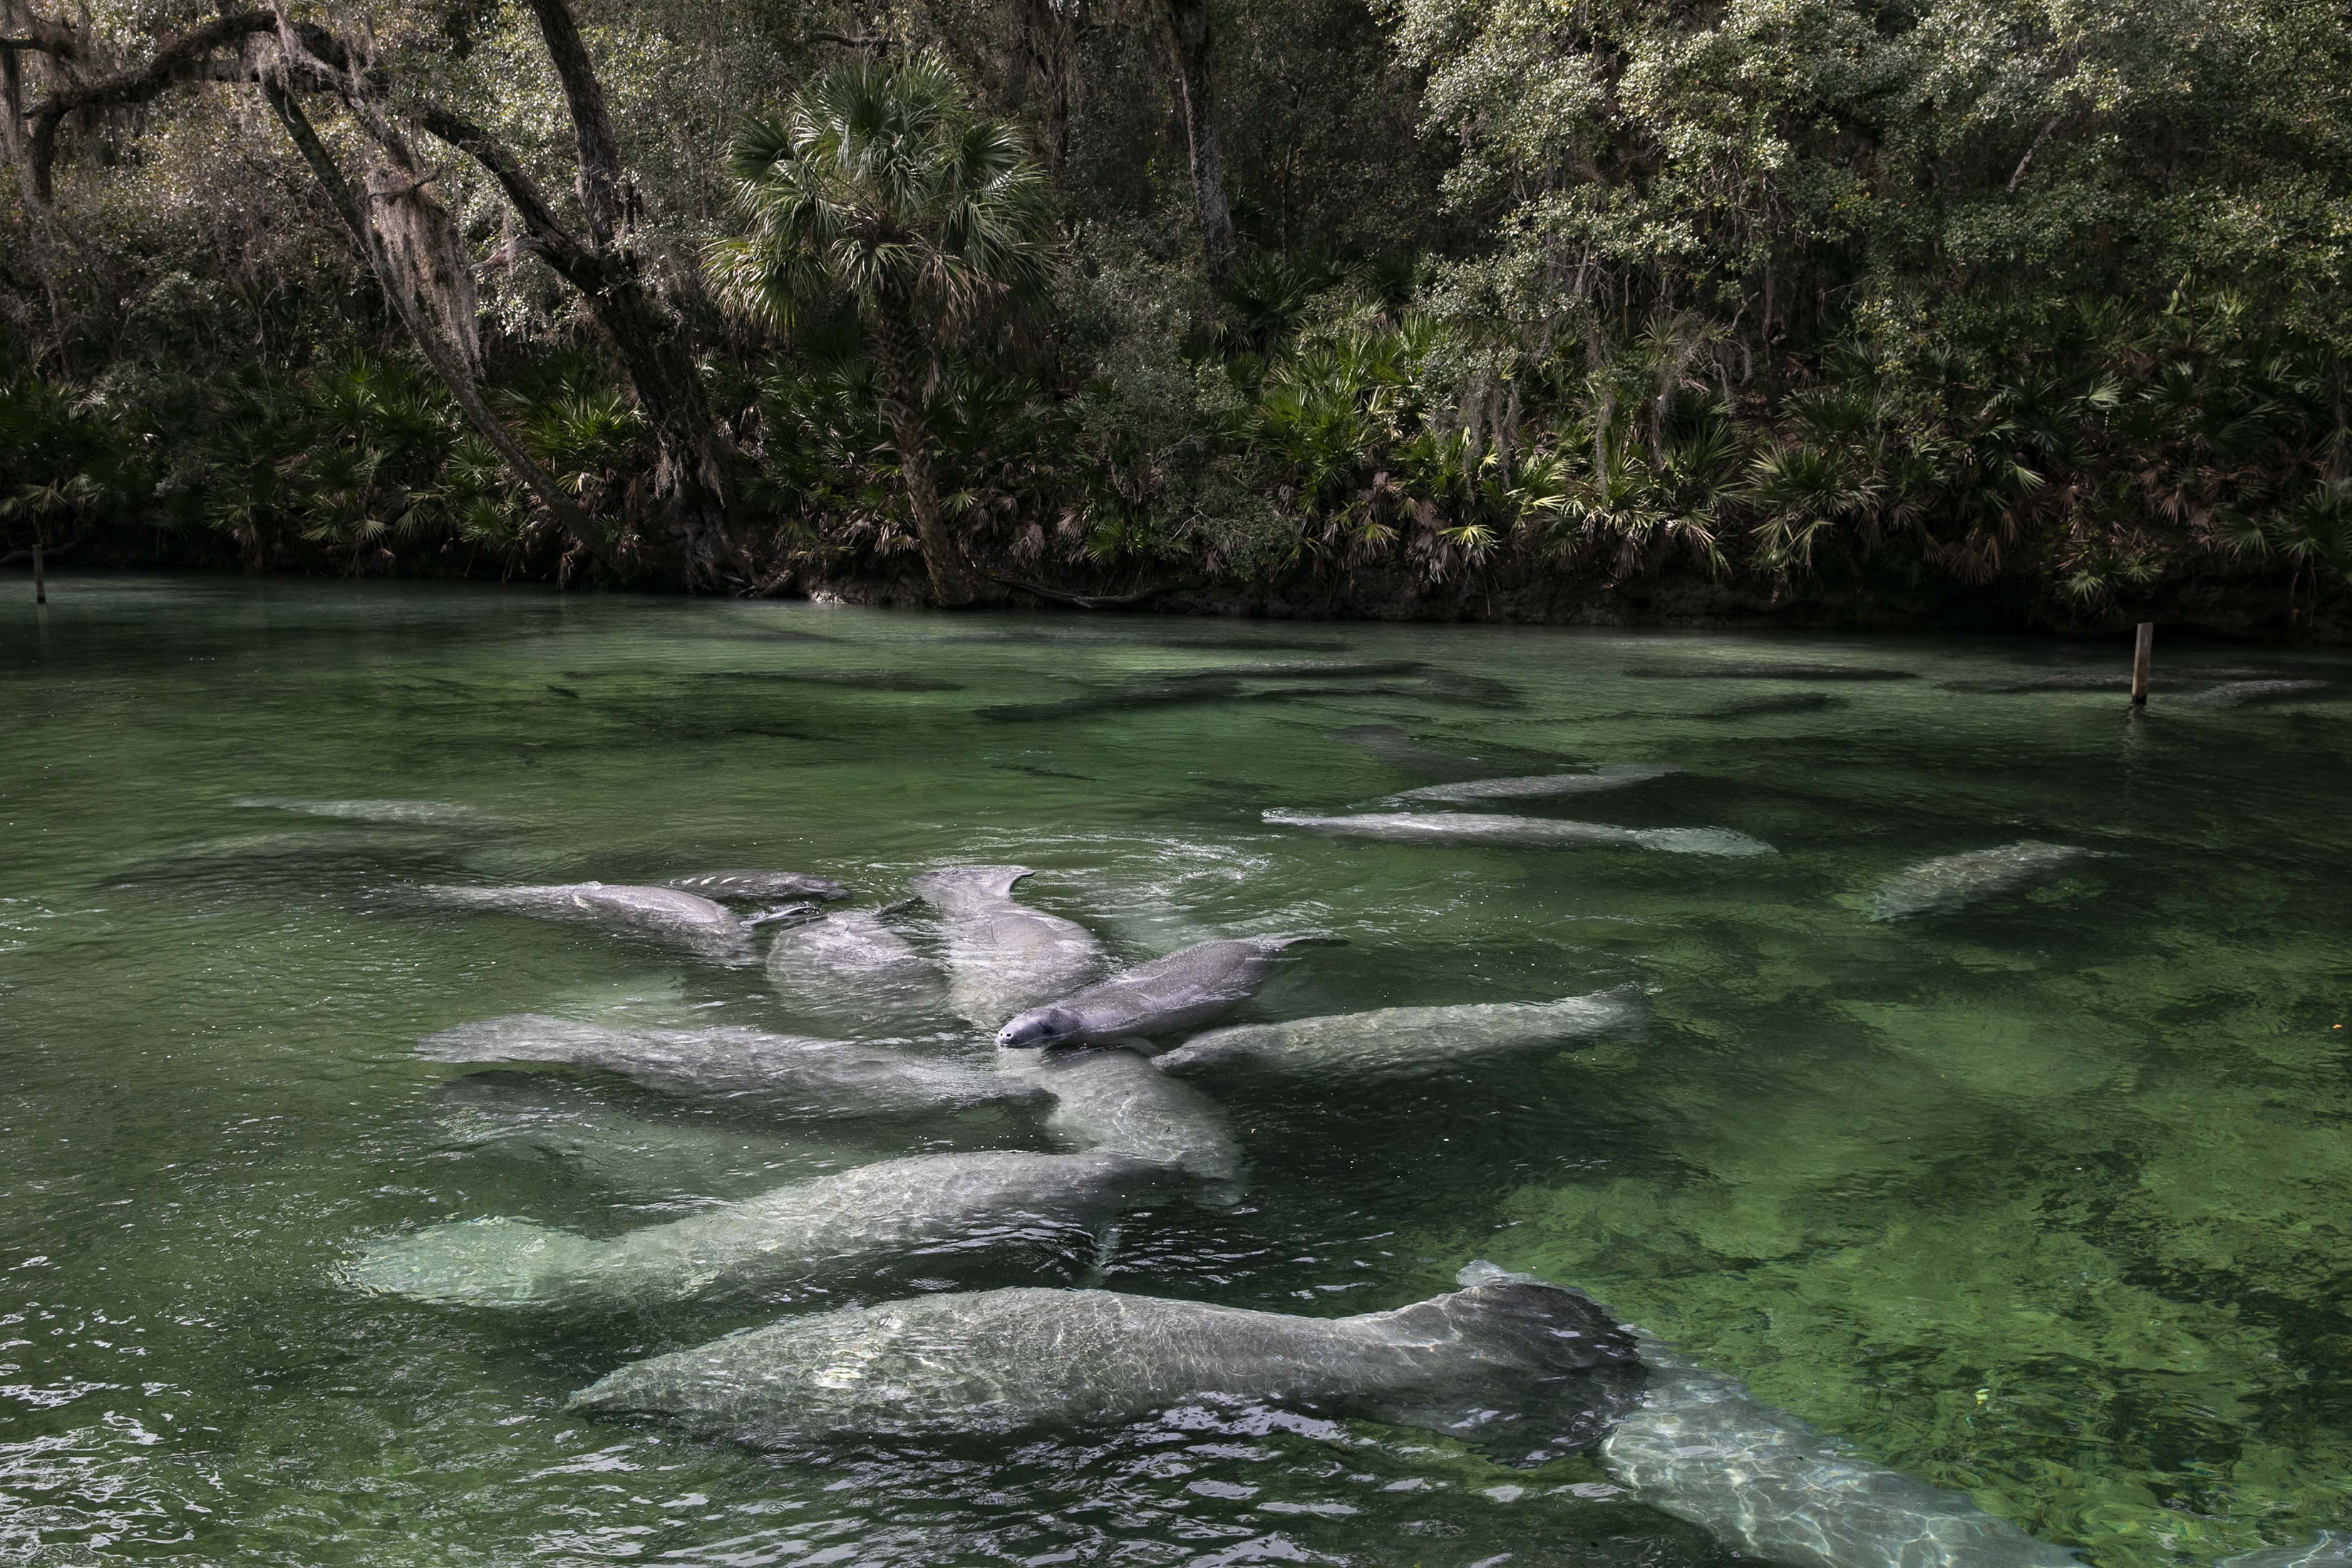 Trying everything, even lettuce, to save Florida’s beloved manatees